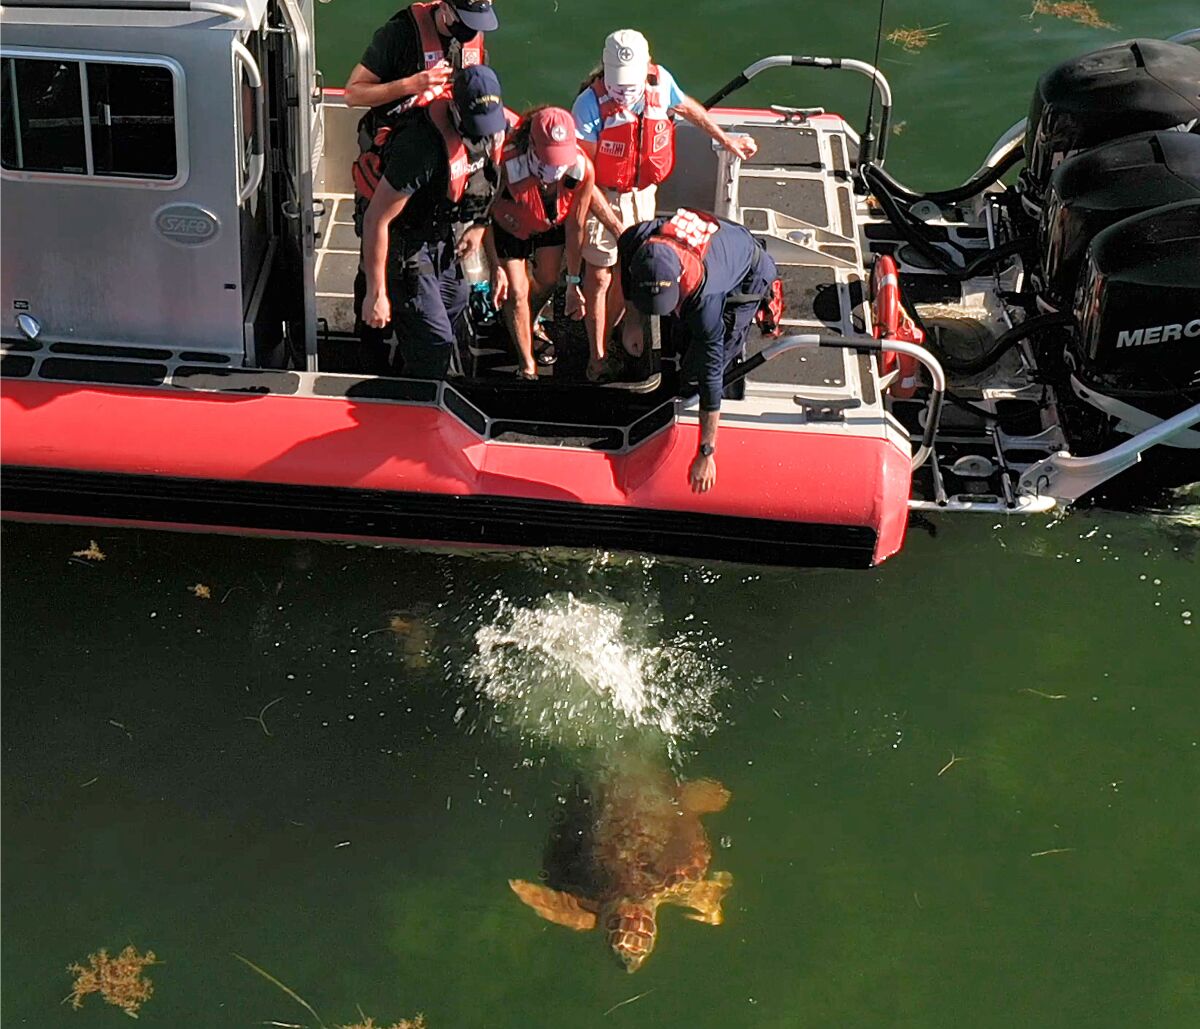 In this aerial drone photo, provided by the Florida Keys News Bureau, staff from the Florida Keys-based Turtle Hospital and U.S. Coast Guard release "Emma," a loggerhead sea turtle, Thursday, Aug. 6, 2020, off Islamorada, Fla. "Emma" was one of two turtles Coast Guard personnel helped to rescue about two months ago off the Keys that were treated at the Turtle Hospital for various ailments. (Bob Care/Florida Keys News Bureau via AP)